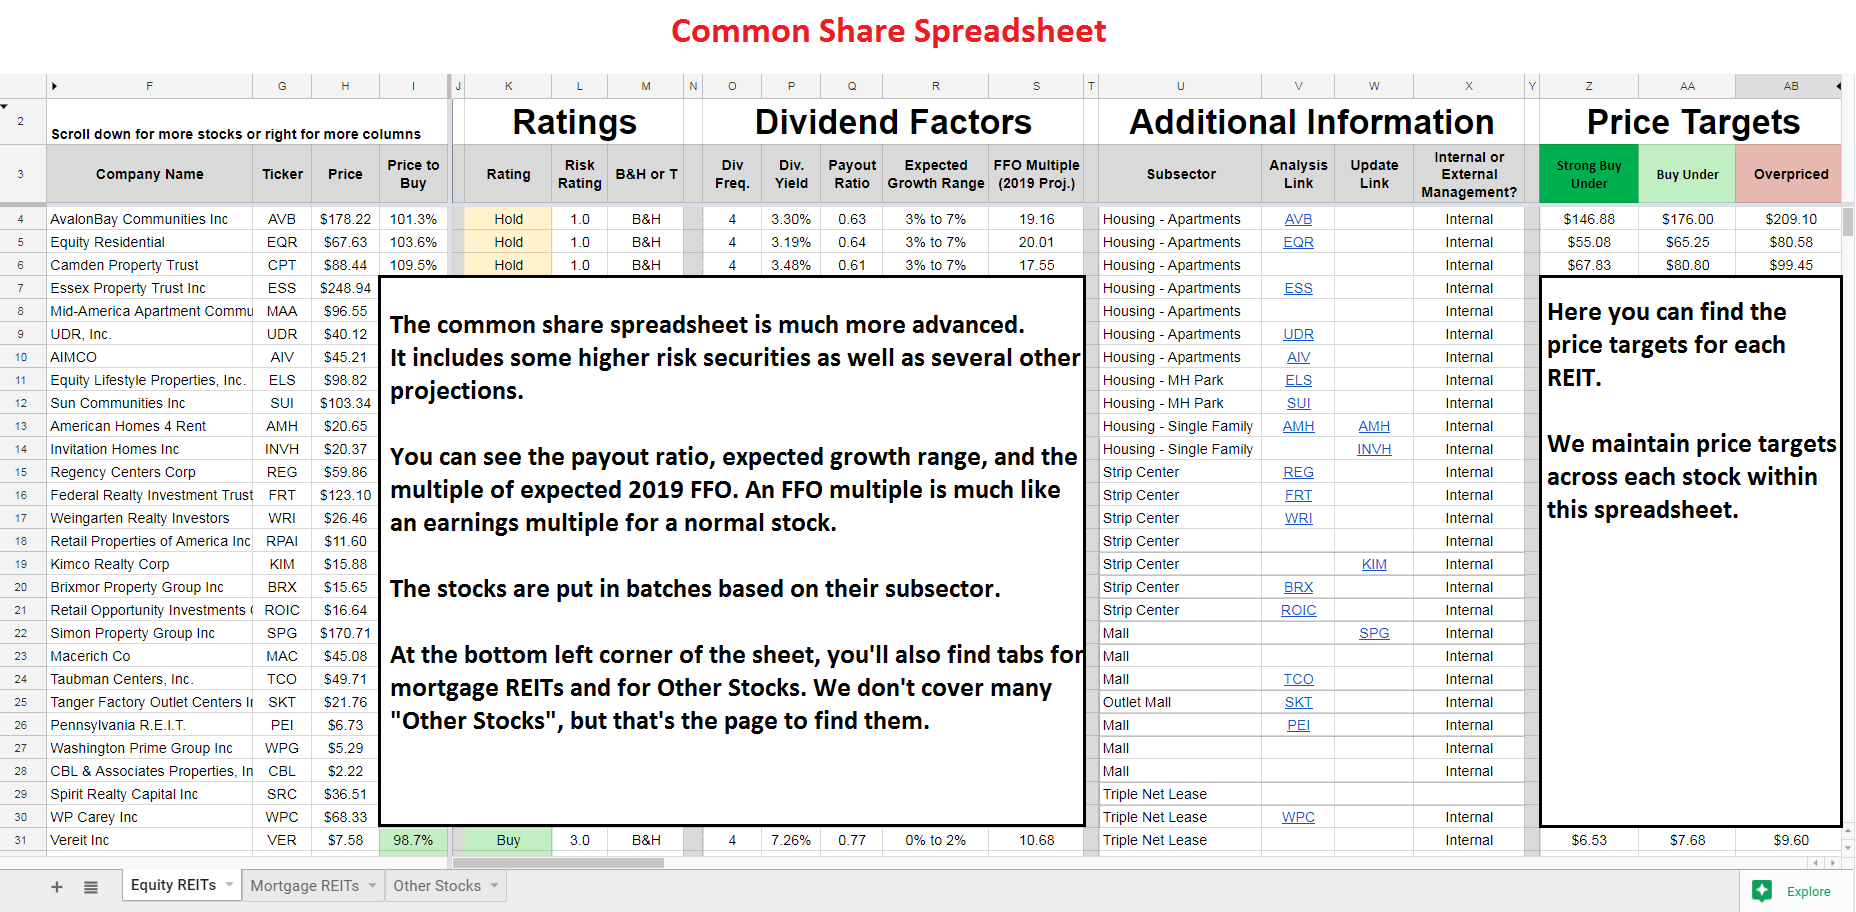 The Reit Forum Marketplace Checkout Seeking Alpha - the common share spreadsheet goes into greater depth on discussing the individual stocks for the money manager or experienced investor in reits